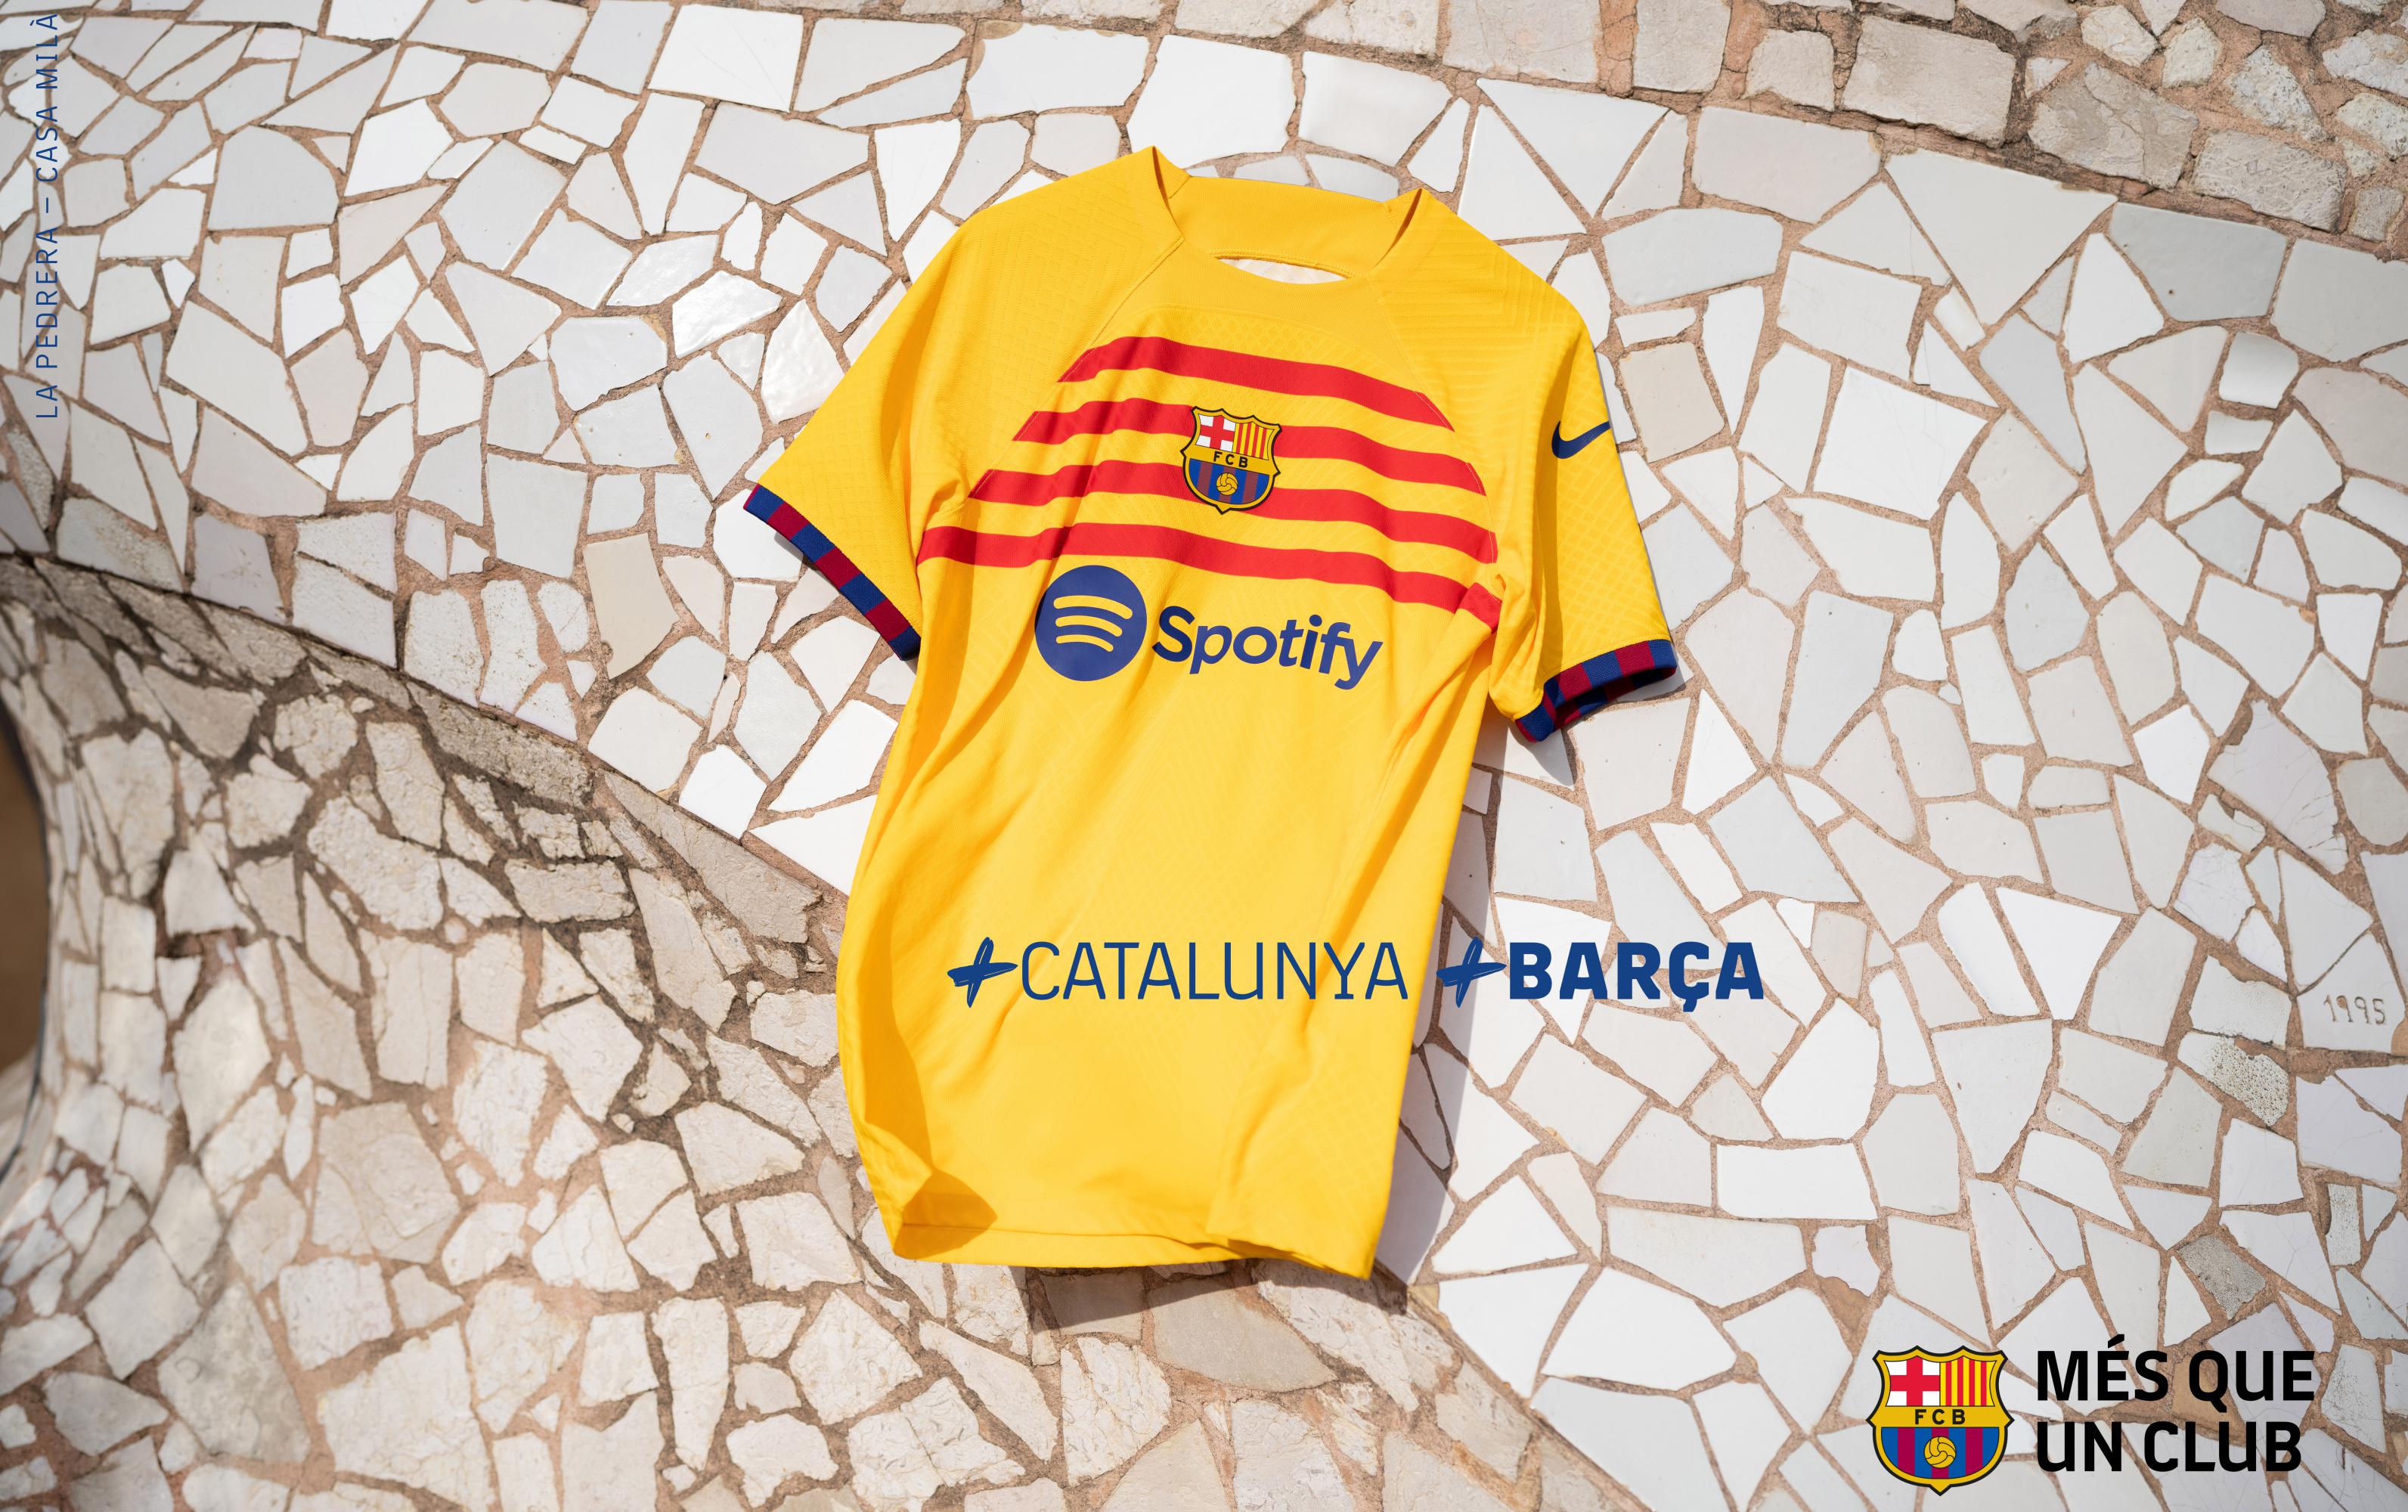 Barça pays tribute to its roots with the 'senyera' front and centre on the kit